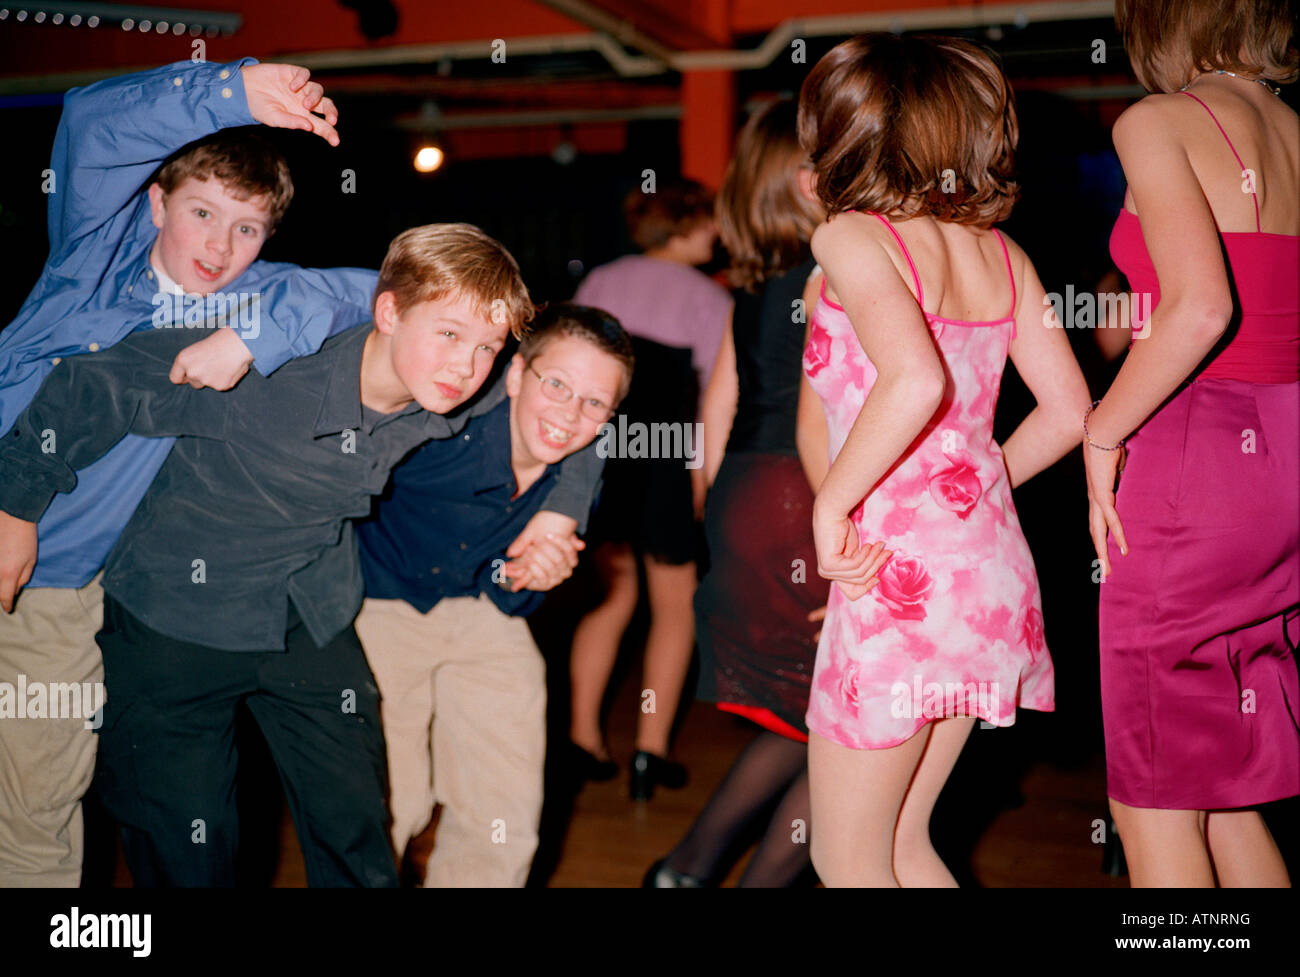 Ed Sweet, Harry Bucknall and Jack Robinson educated at Dulwich College Prep lark about on the dance floor. Stock Photo